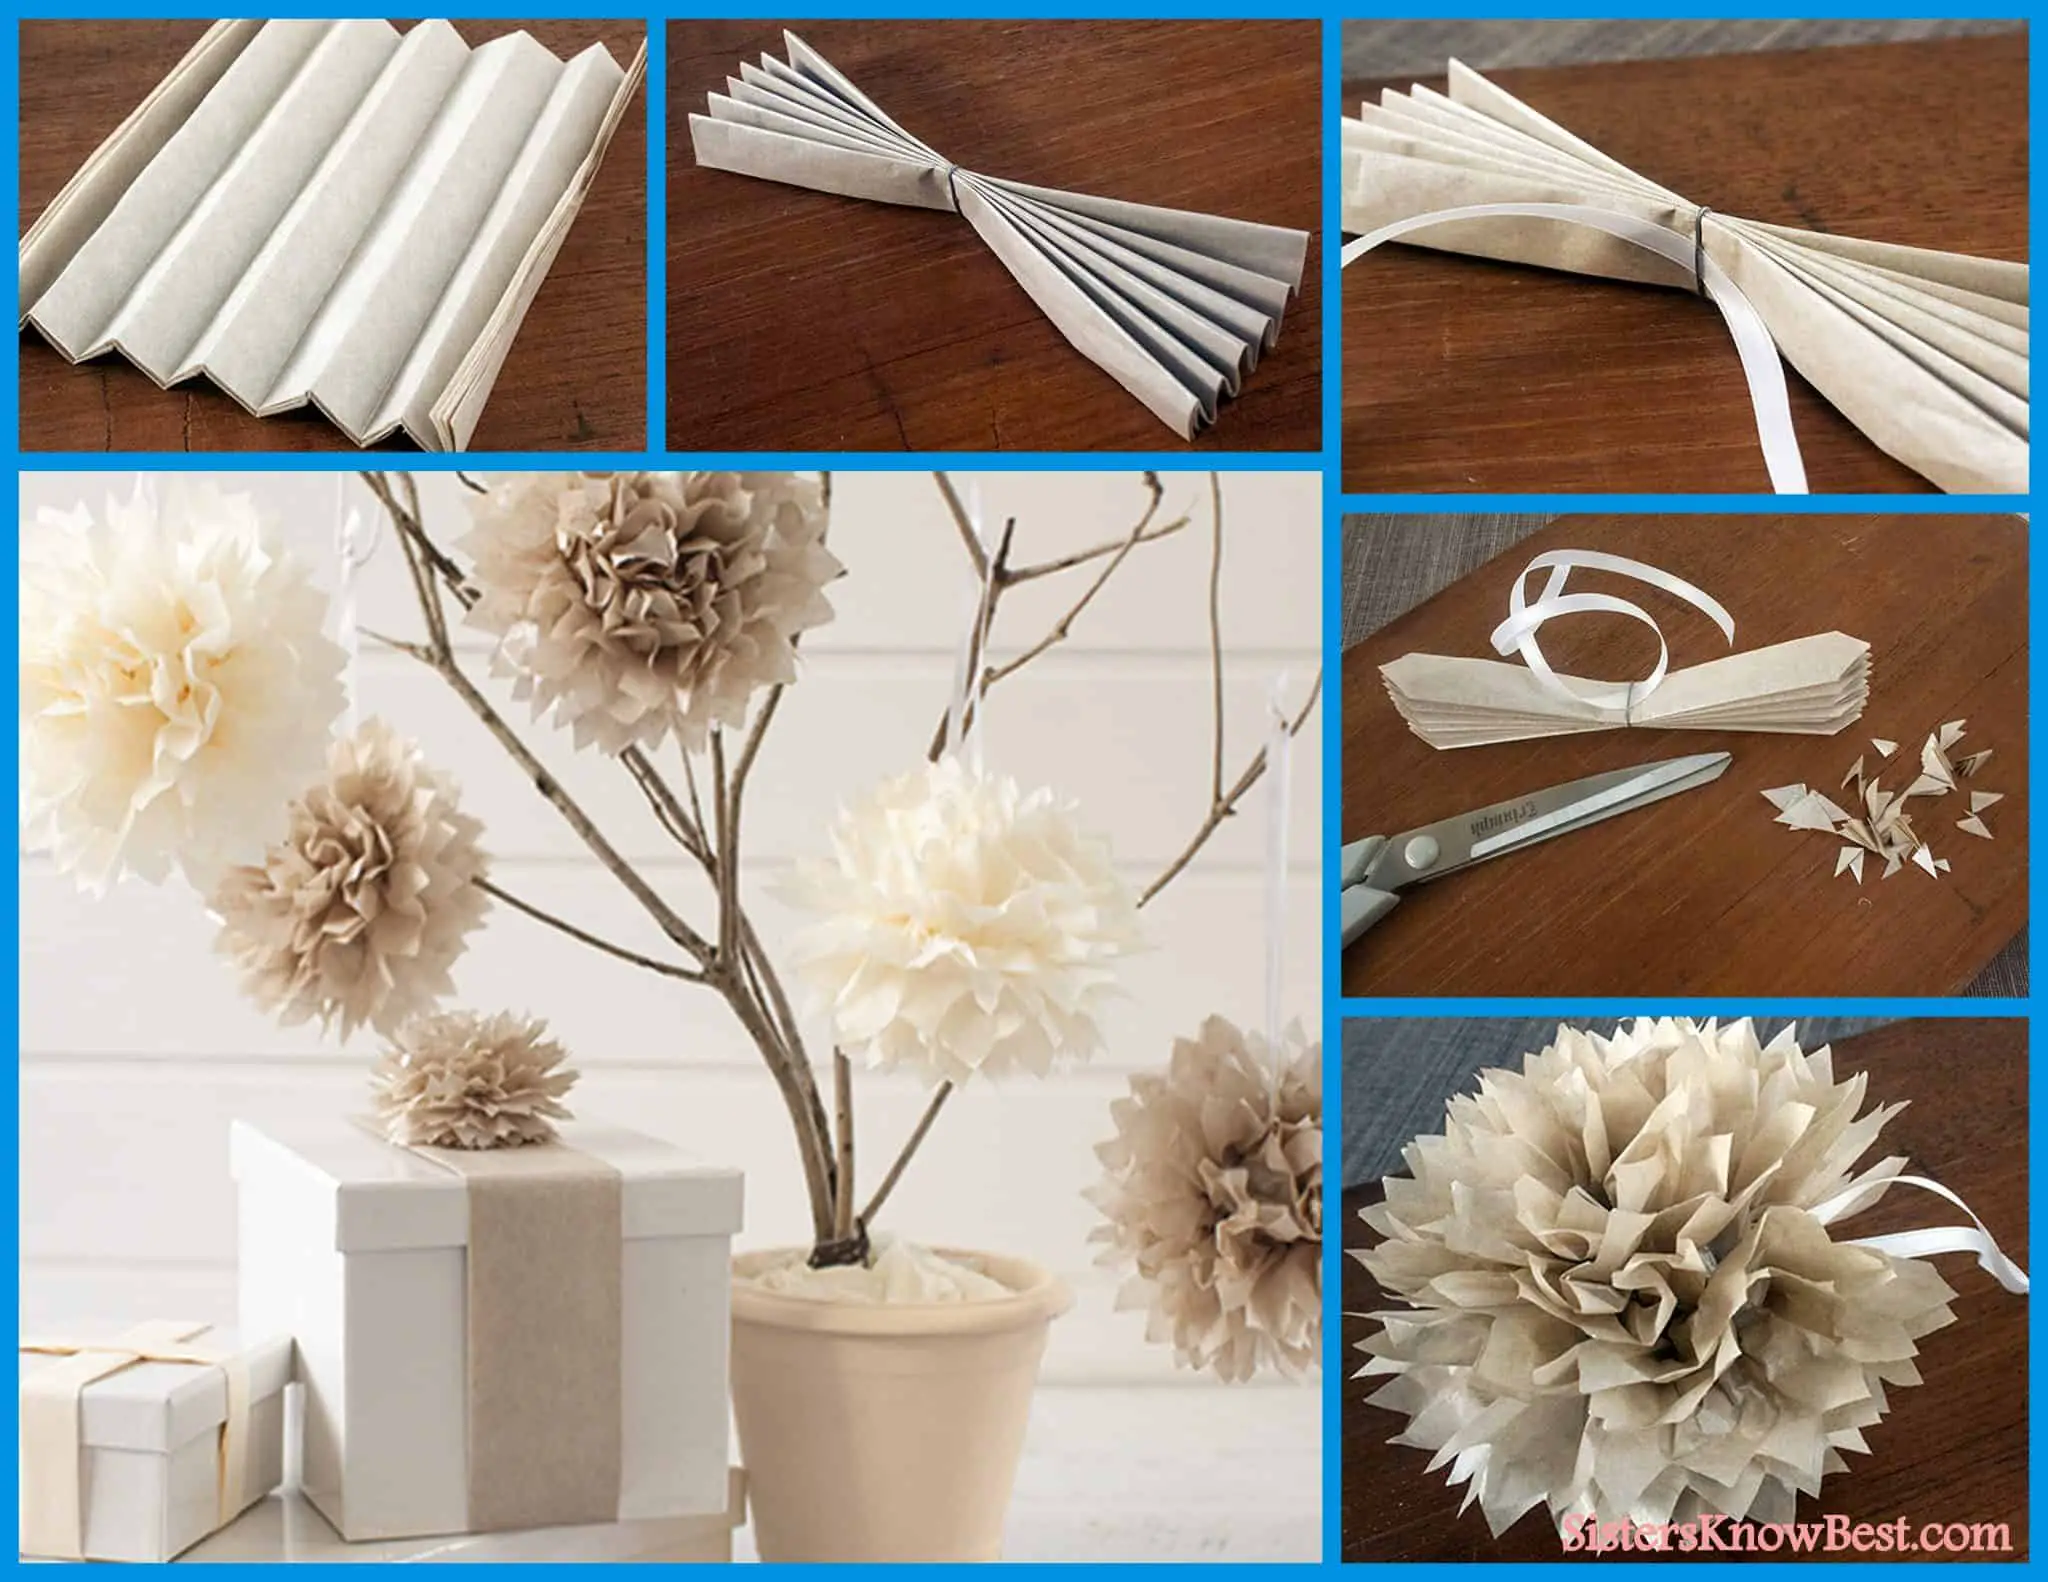 easy-diy-paper-tissue-flower-decorations-sisters-know-best